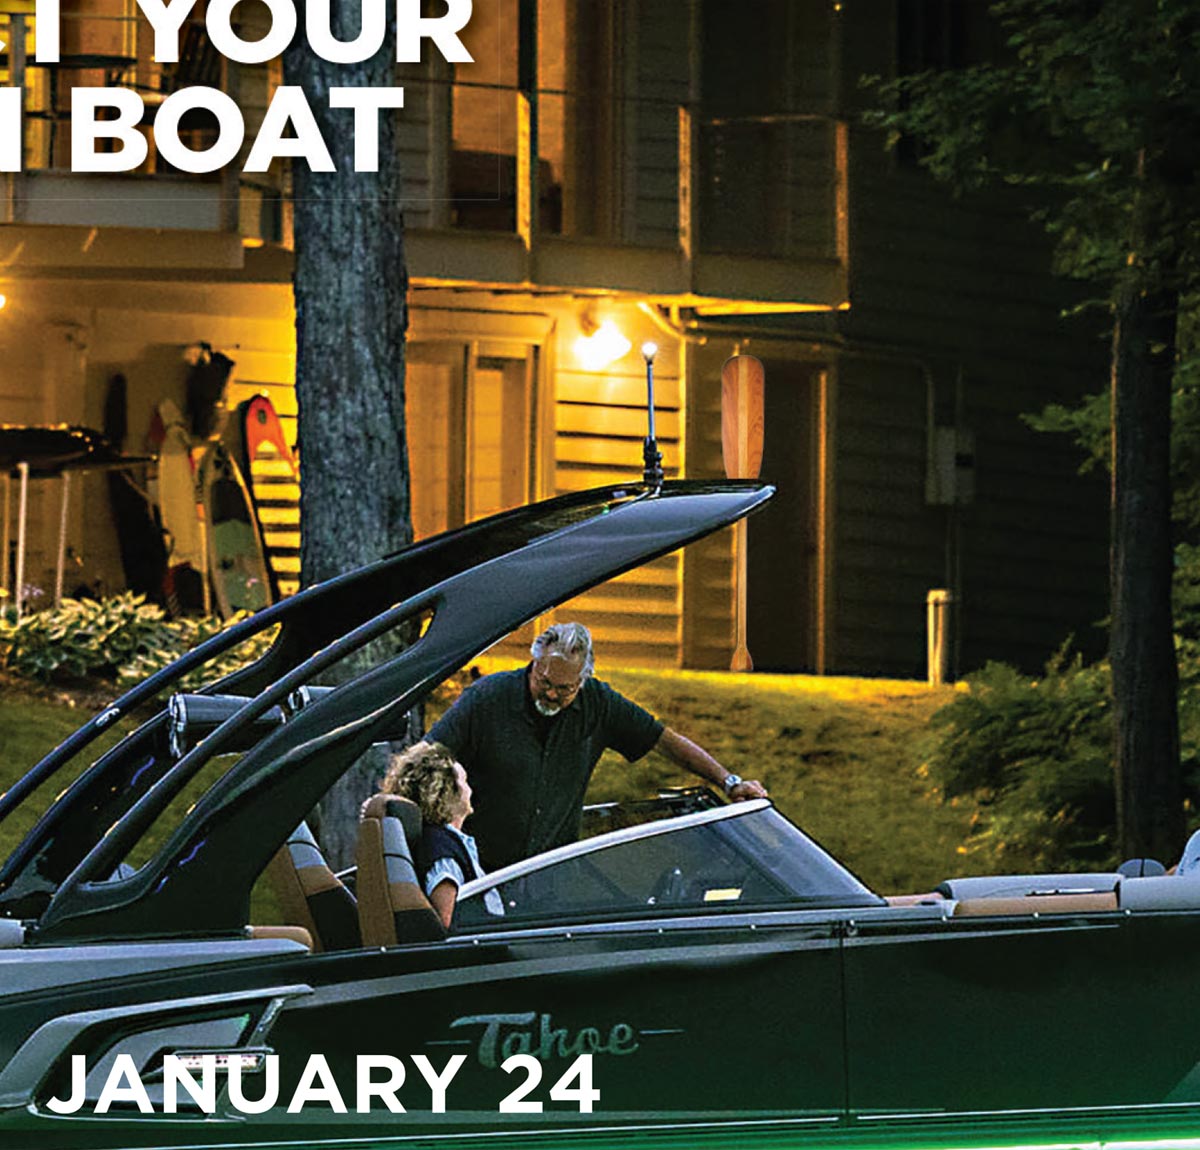 zoom in of image from the January 24 issue of Pontoon & Deck Boat